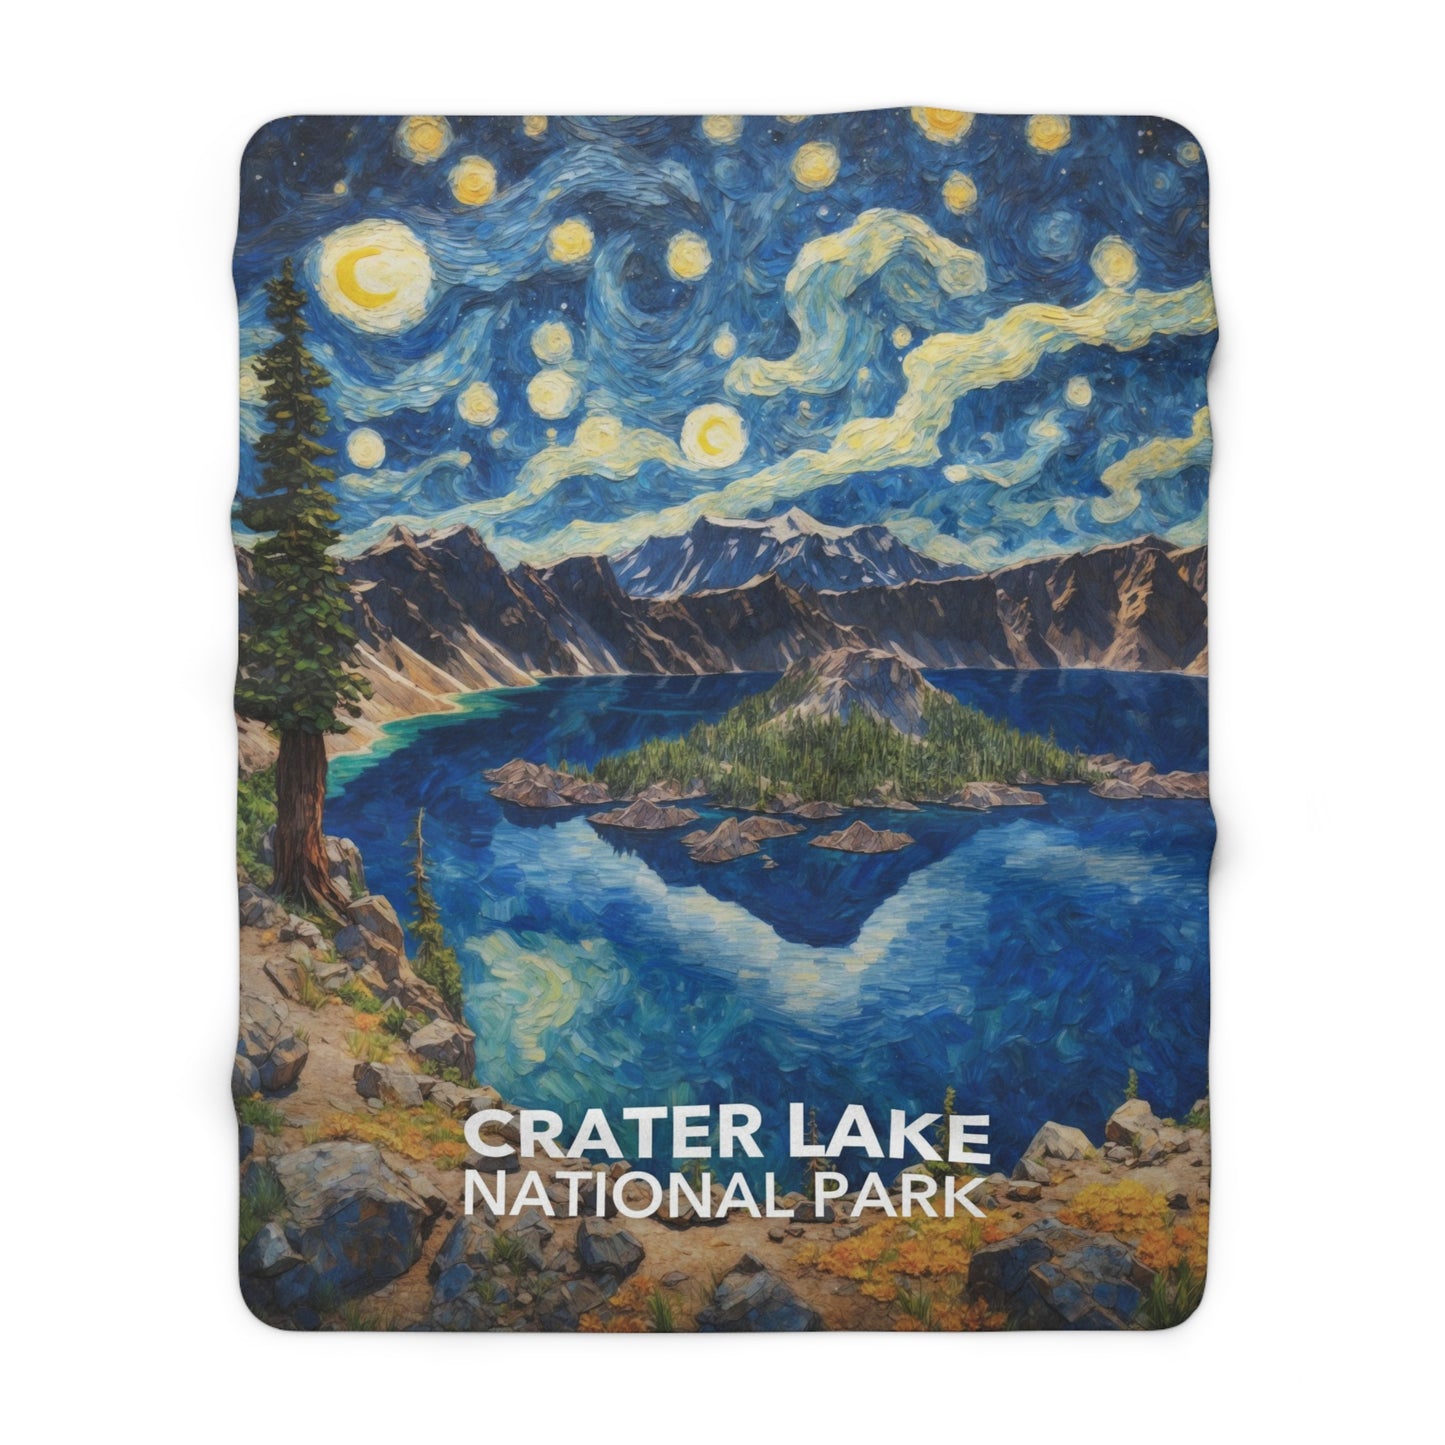 Crater Lake National Park Sherpa Blanket - The Starry Night